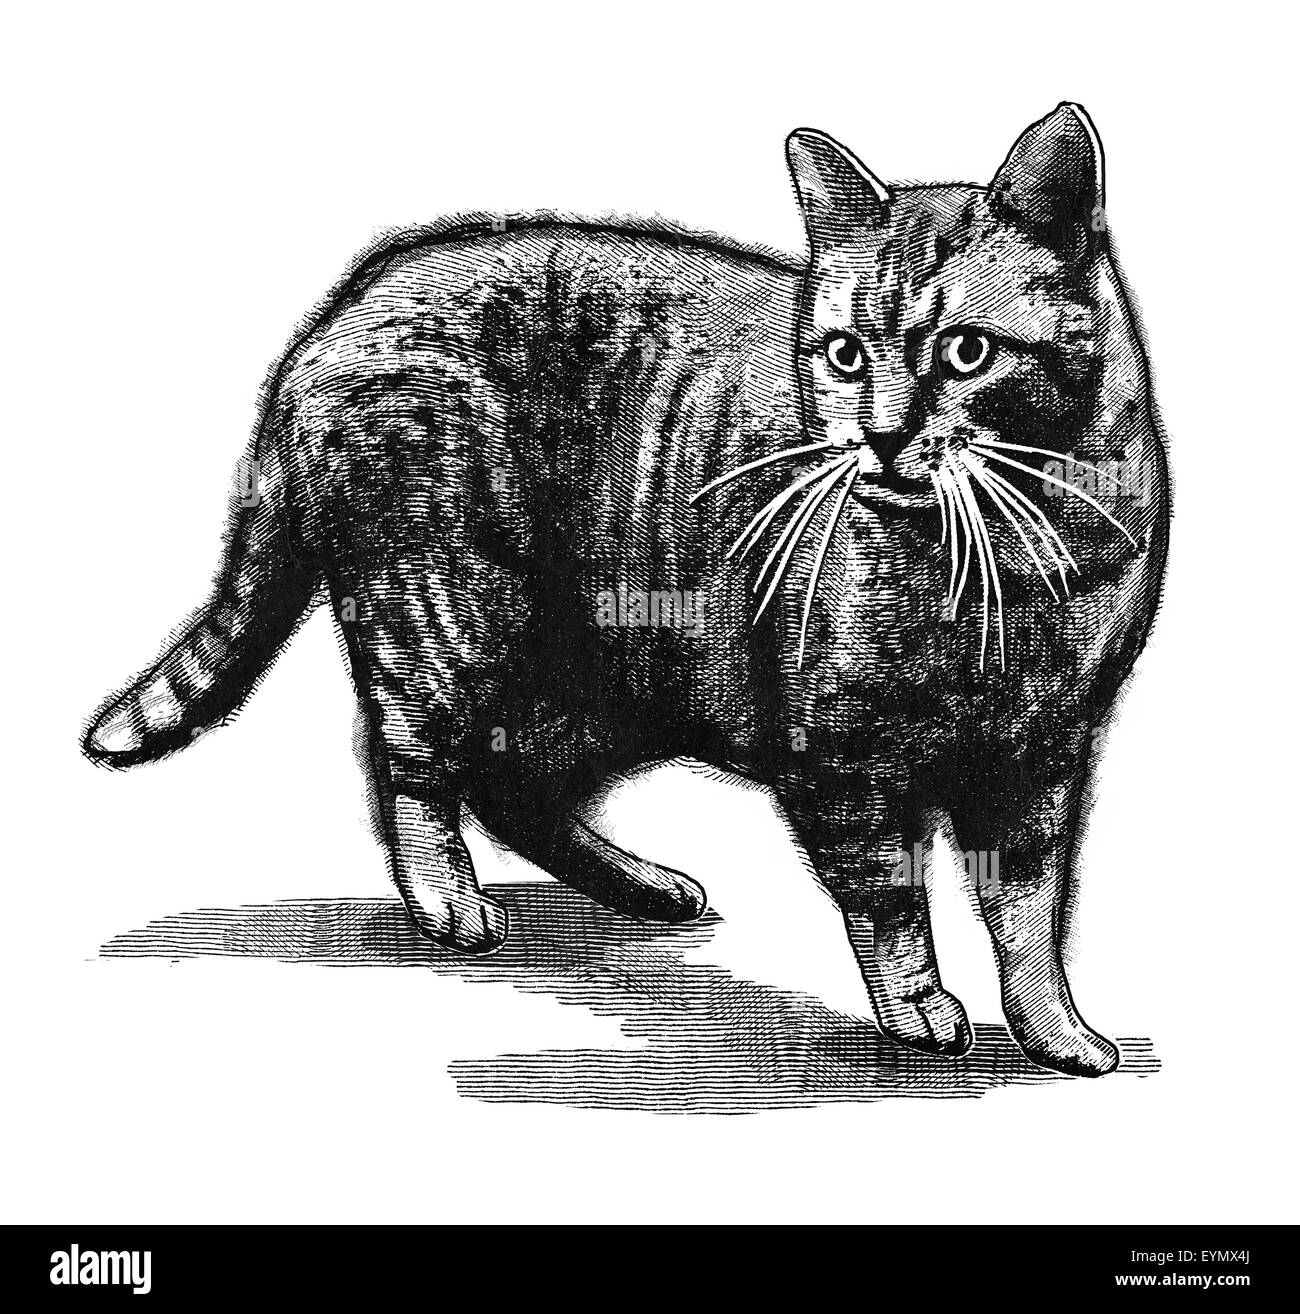 Original digital illustration of a cat, in style of old engravings. Stock Photo